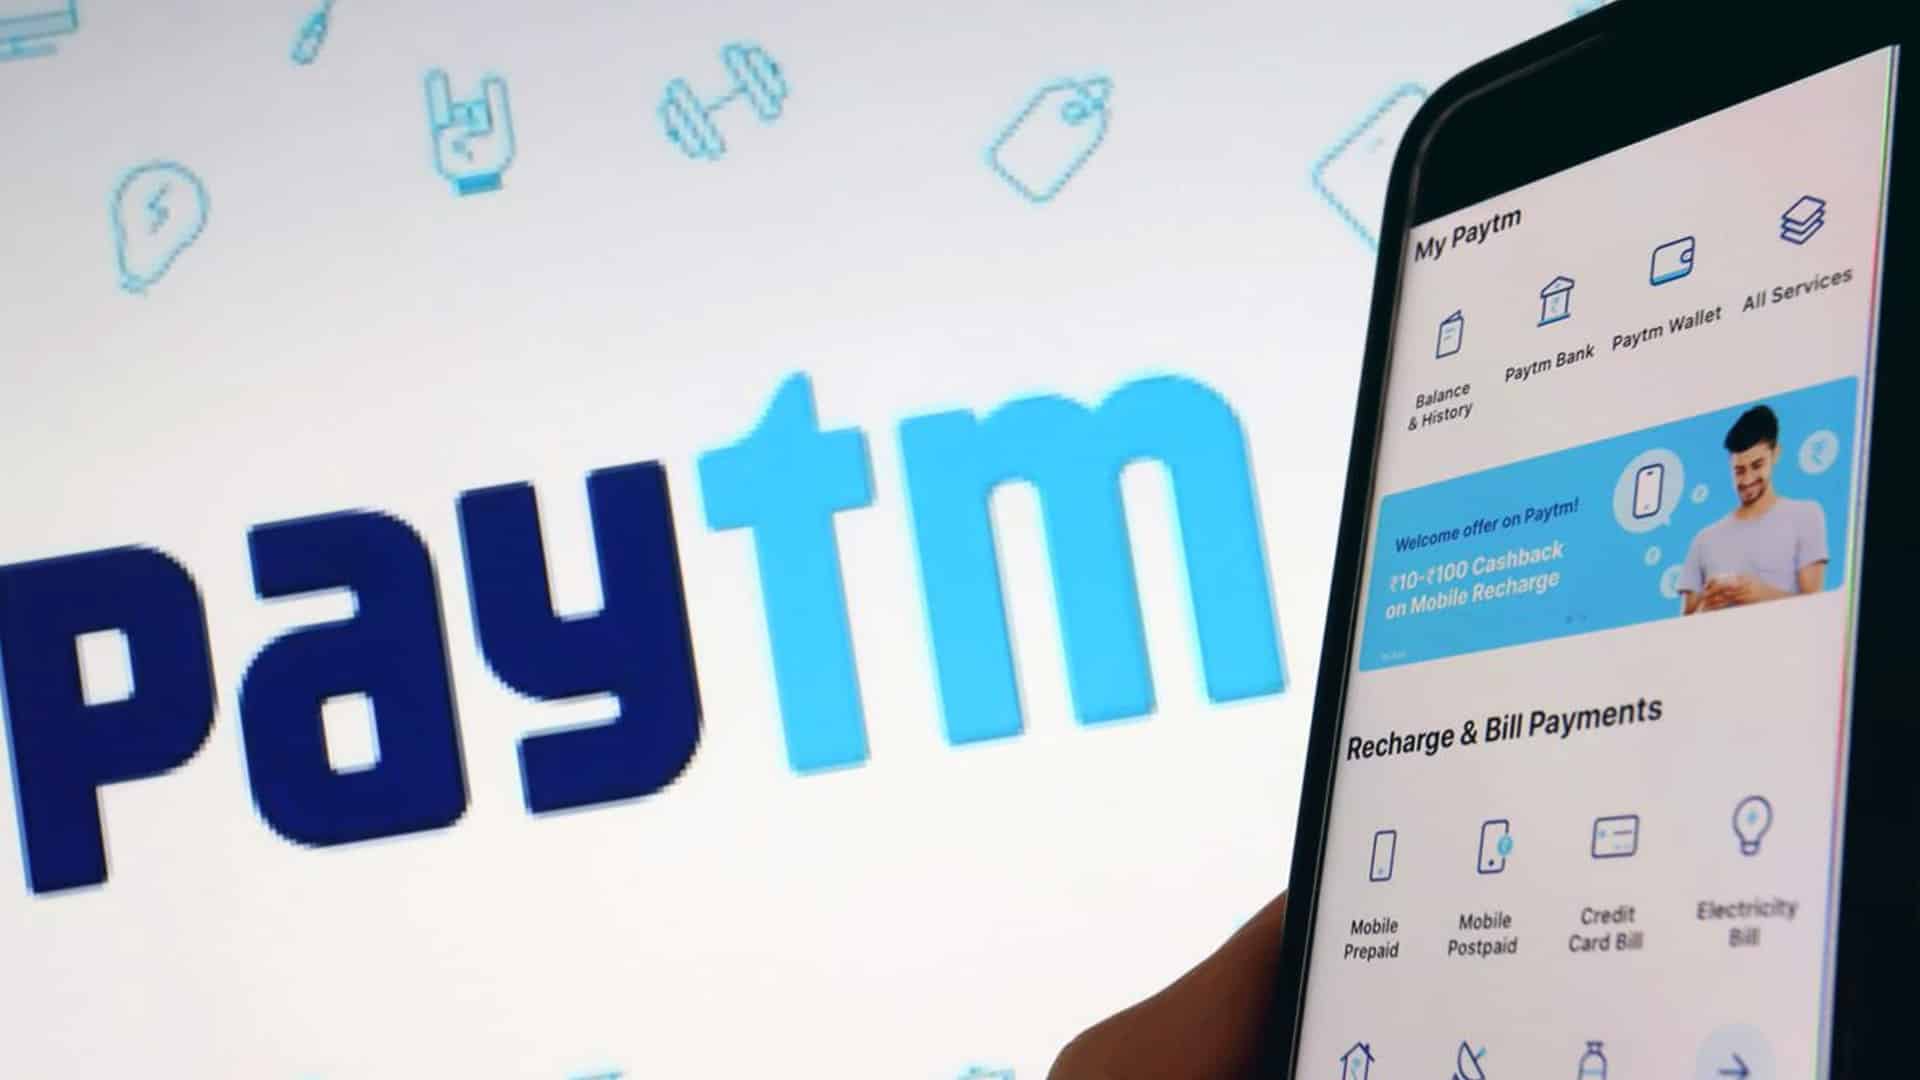 Alibaba Singapore E-commerce sells 3% stake in Paytm worth Rs 1,031 cr